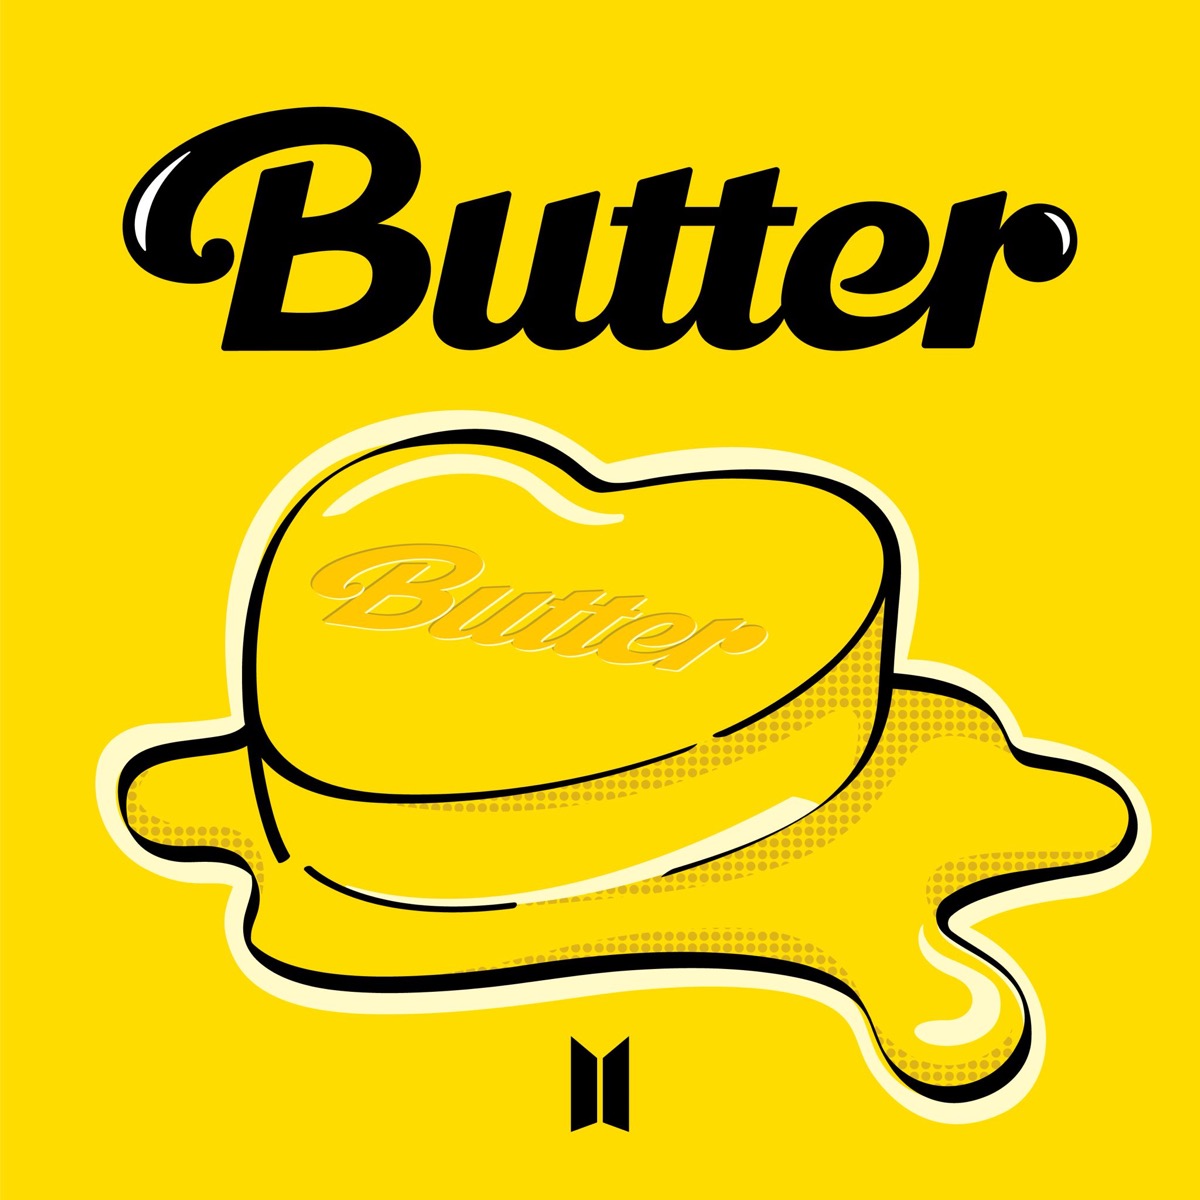 BTS "Butter" single cover